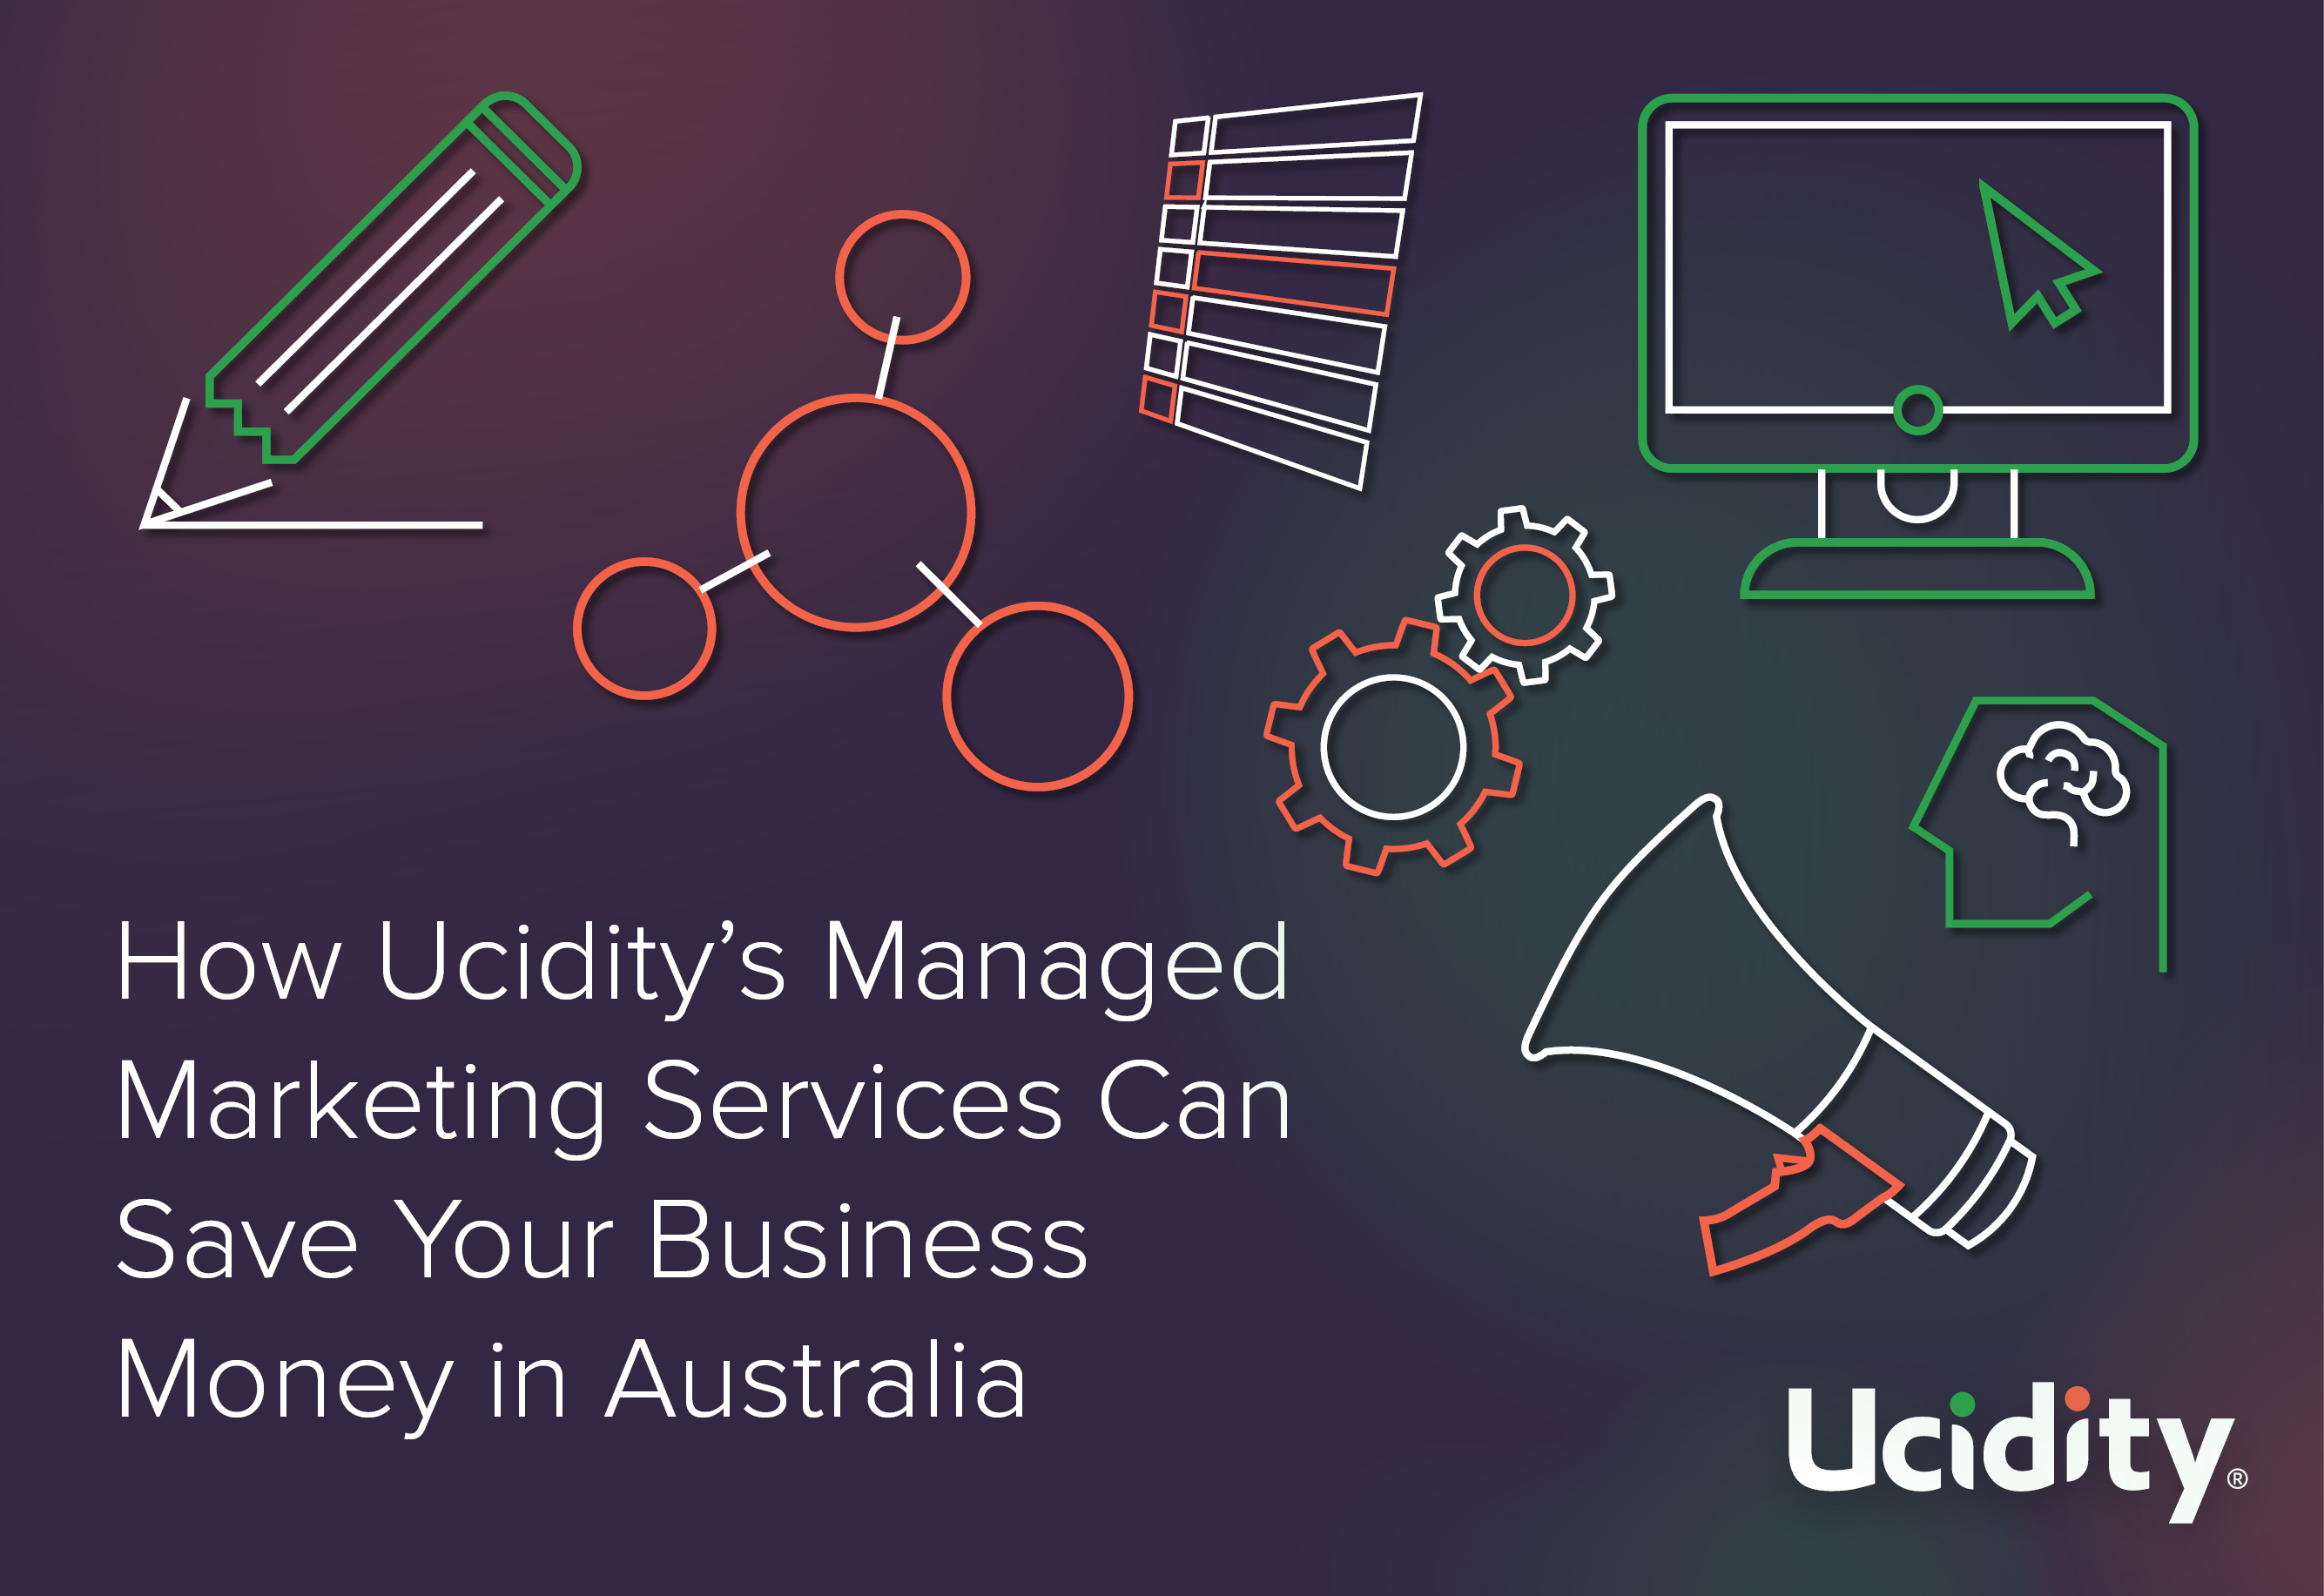 How Ucidity's Managed Marketing Services Can Save Your Business Money in Australia